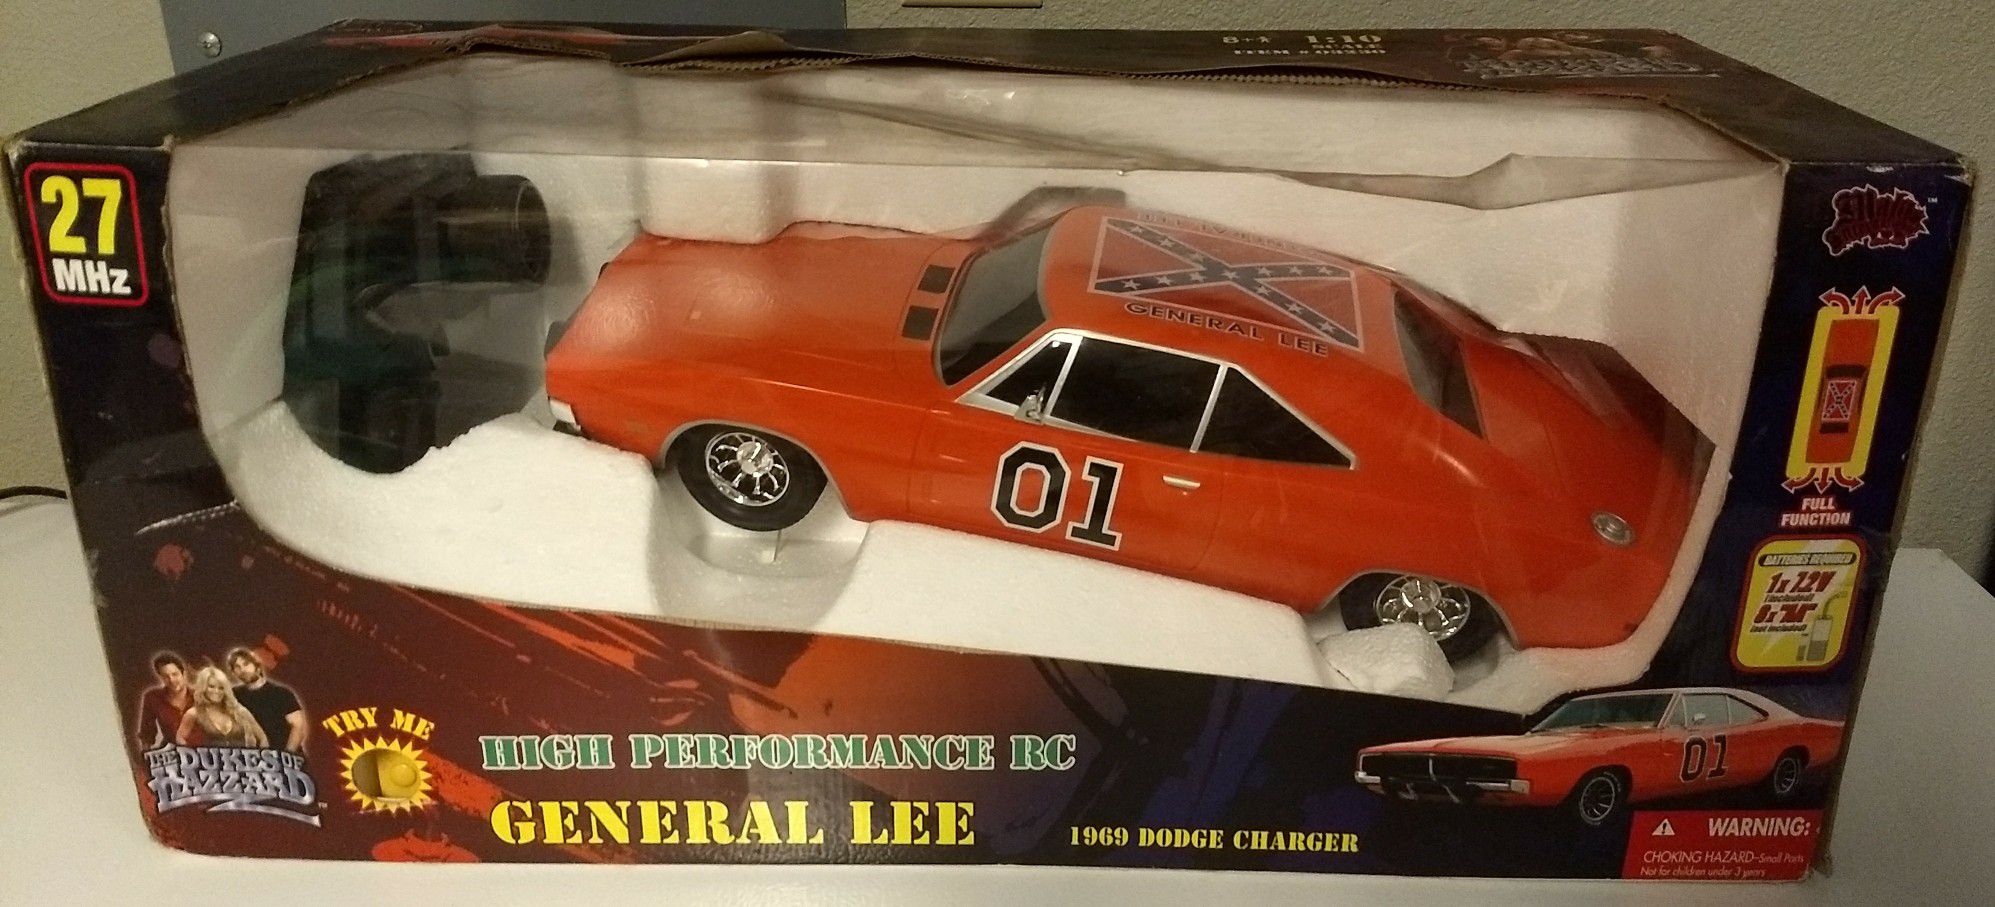 Dukes of Hazzard General Lee R/C car 1:10 scale for Sale in Bulverde, TX -  OfferUp